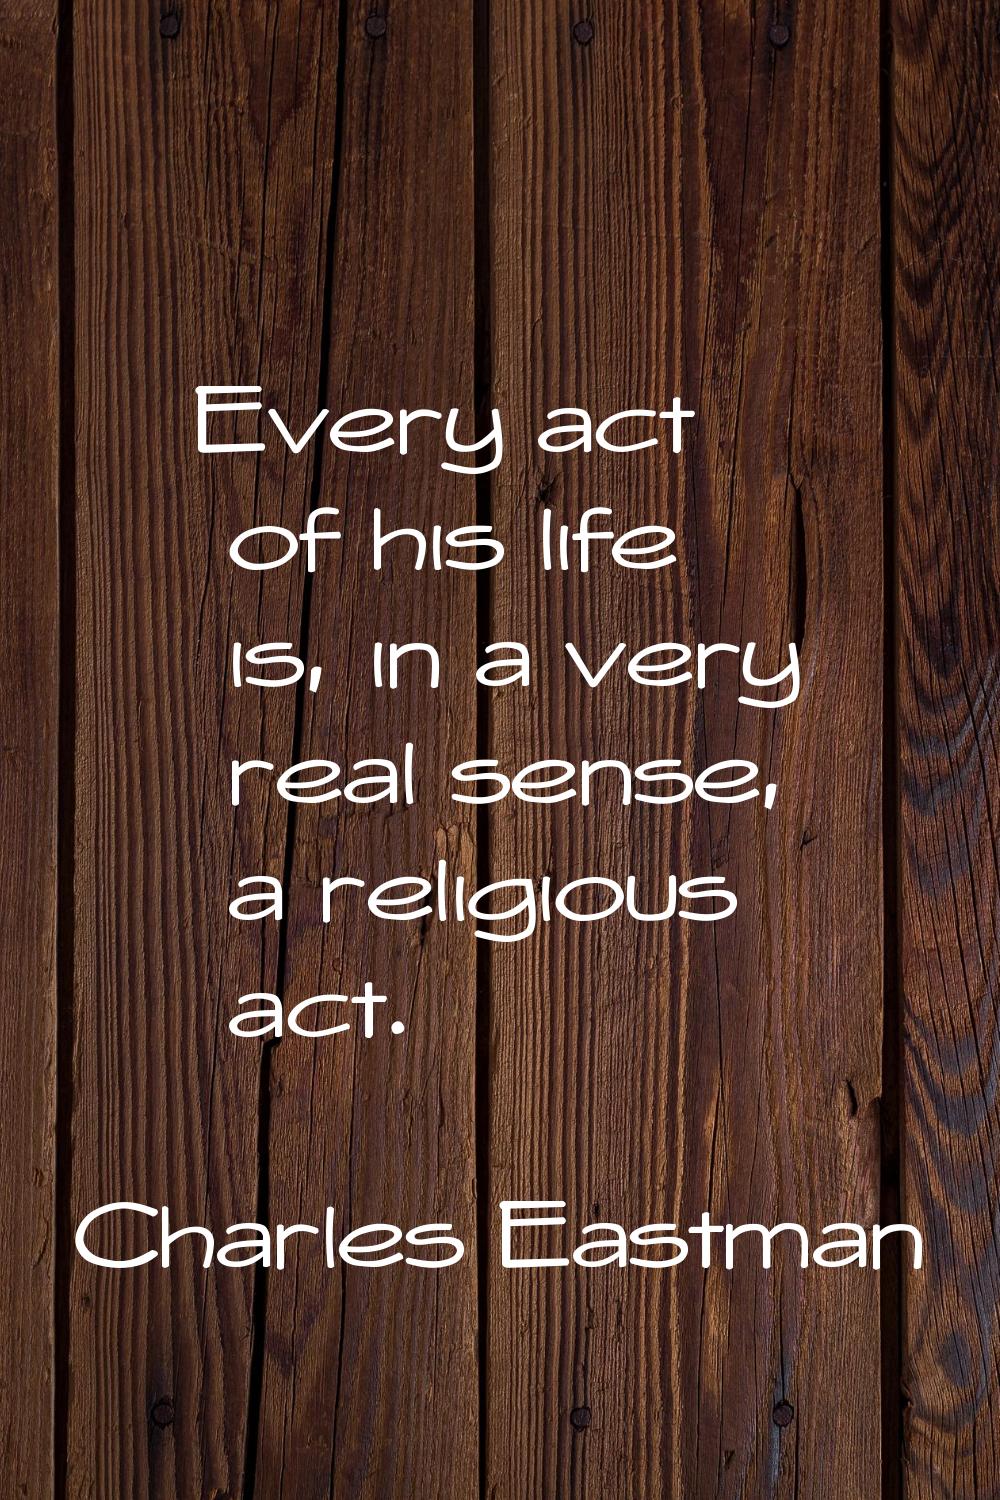 Every act of his life is, in a very real sense, a religious act.